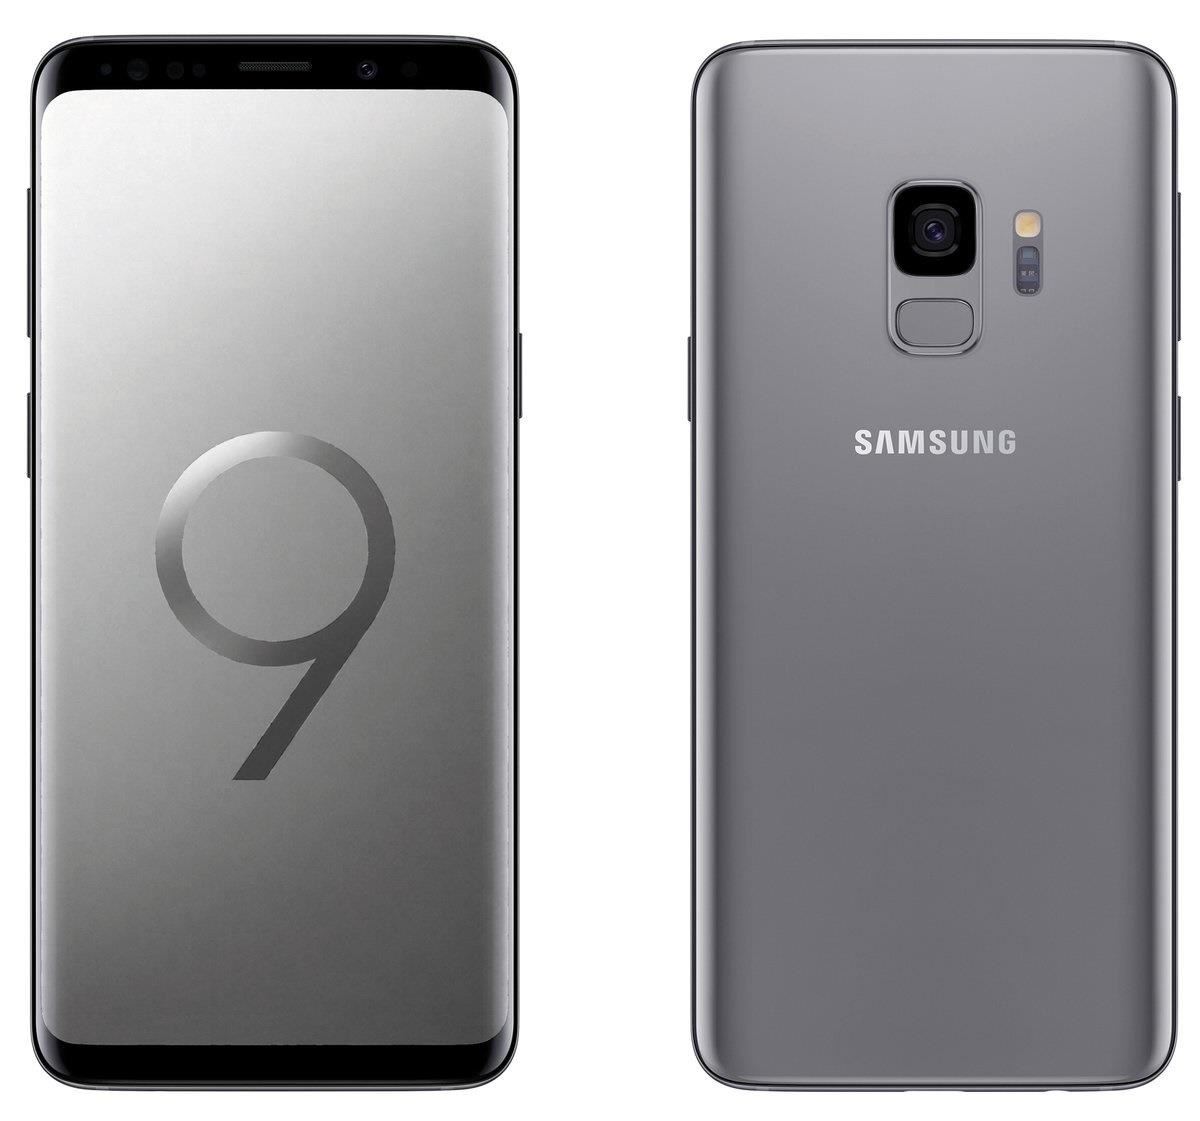 Should You Upgrade to a Galaxy S9 from Your Note 8?